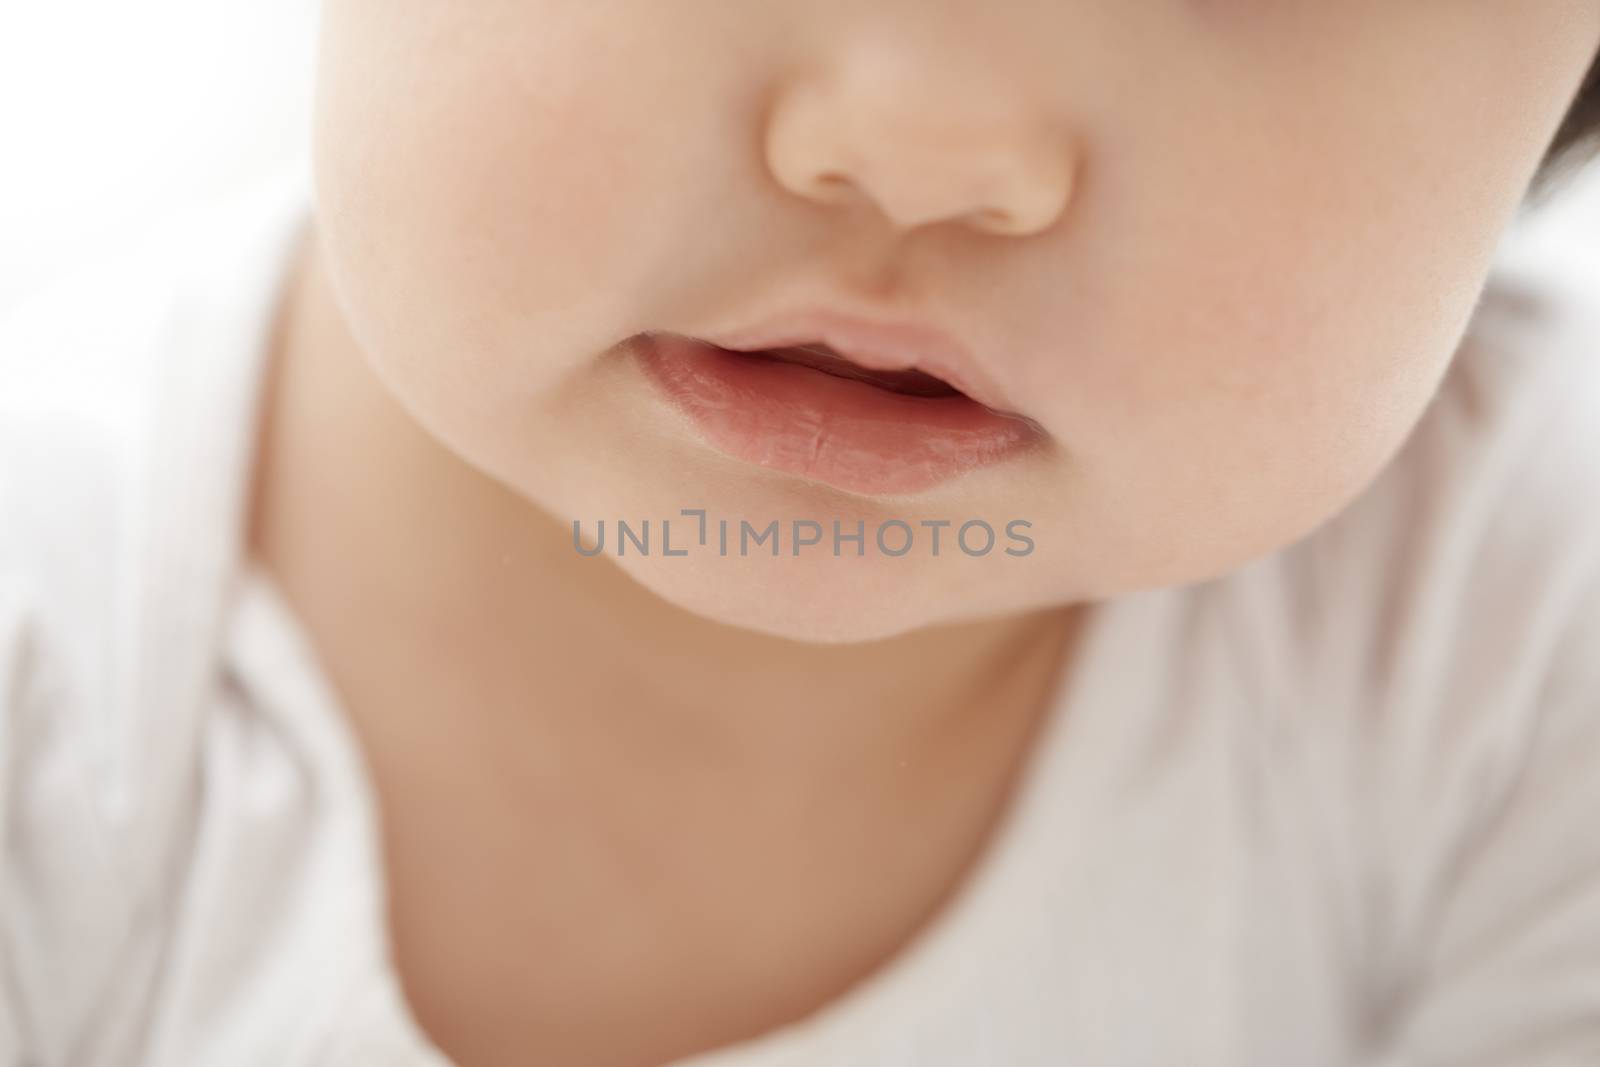 Mouth of the child. Close-up horizontal photo